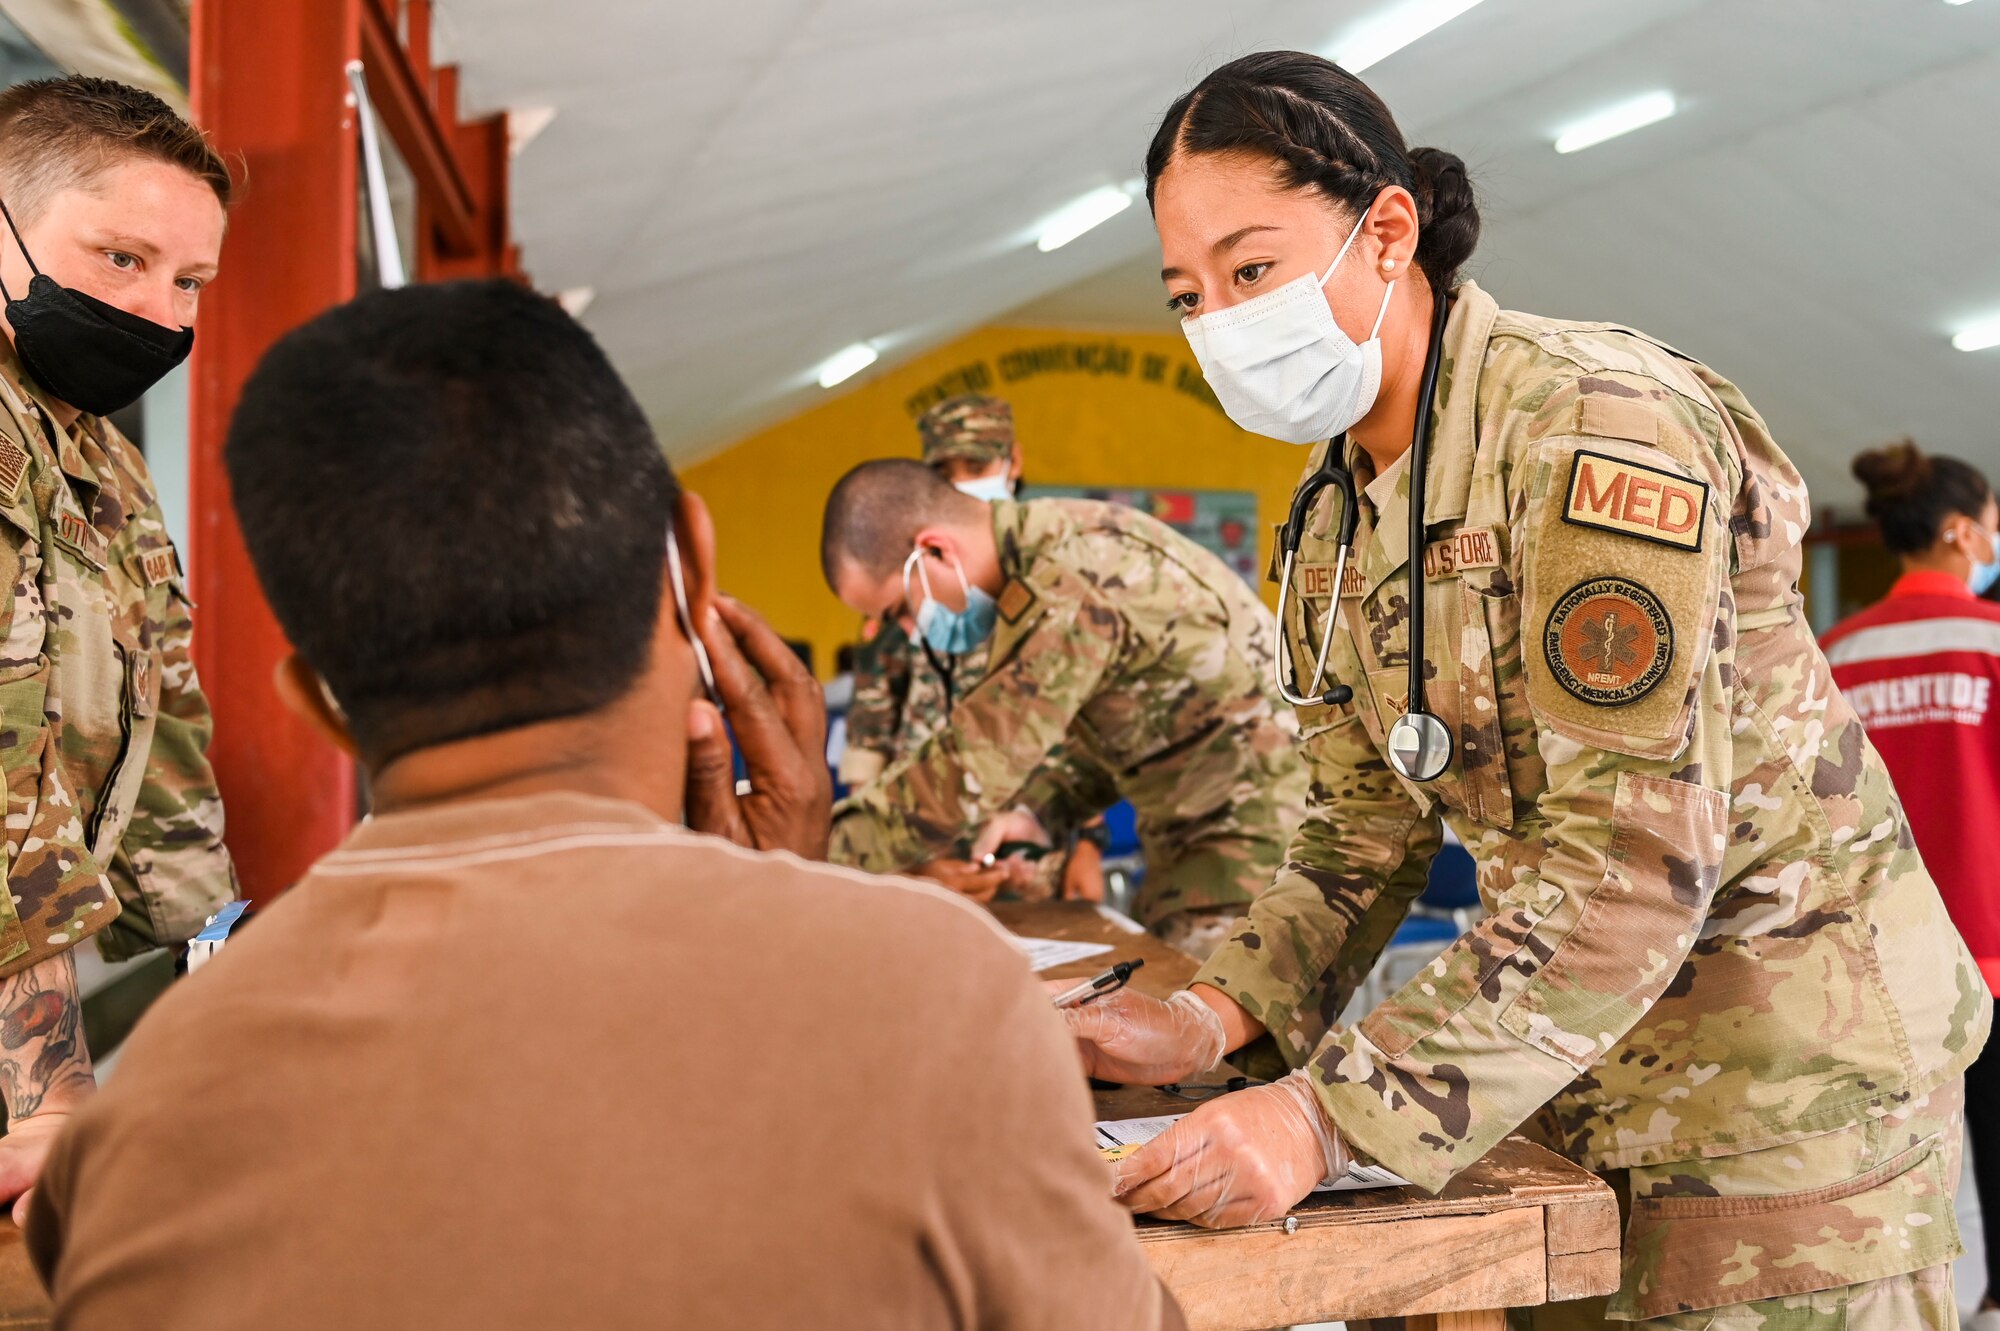 Image of an Airman helping a patient.